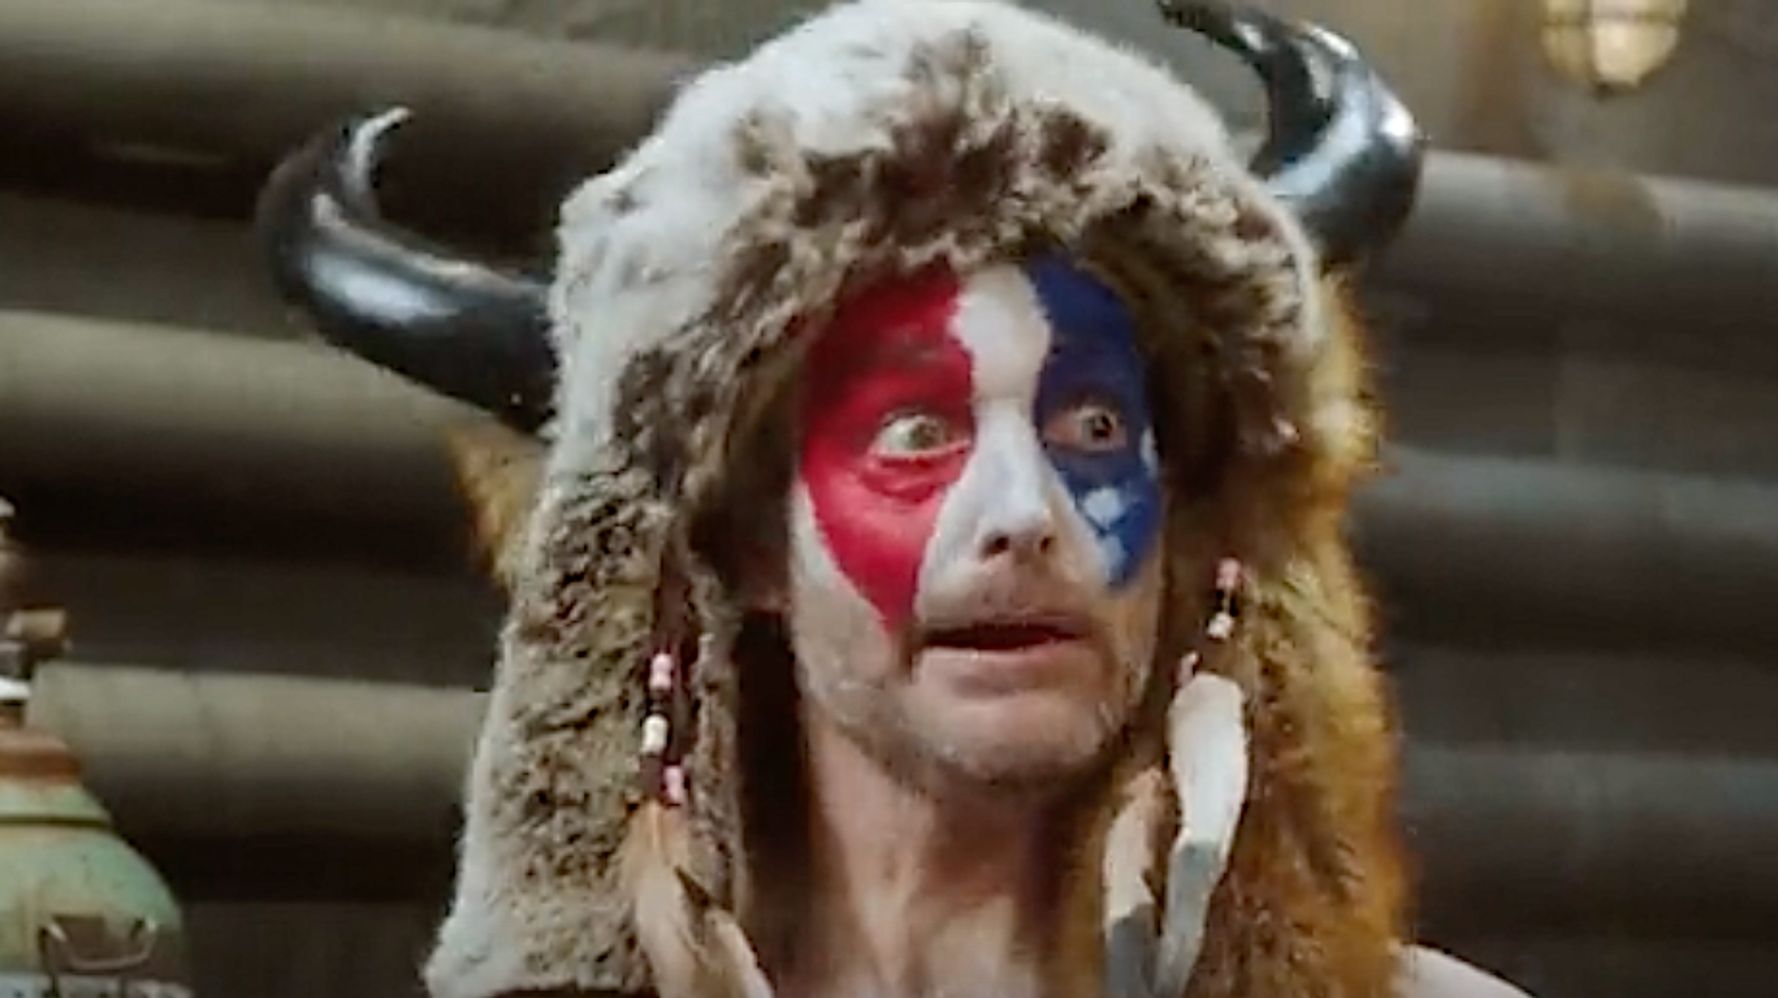 Will Forte Goes Full QAnon Shaman In 'MacGruber' Sketch On 'SNL'